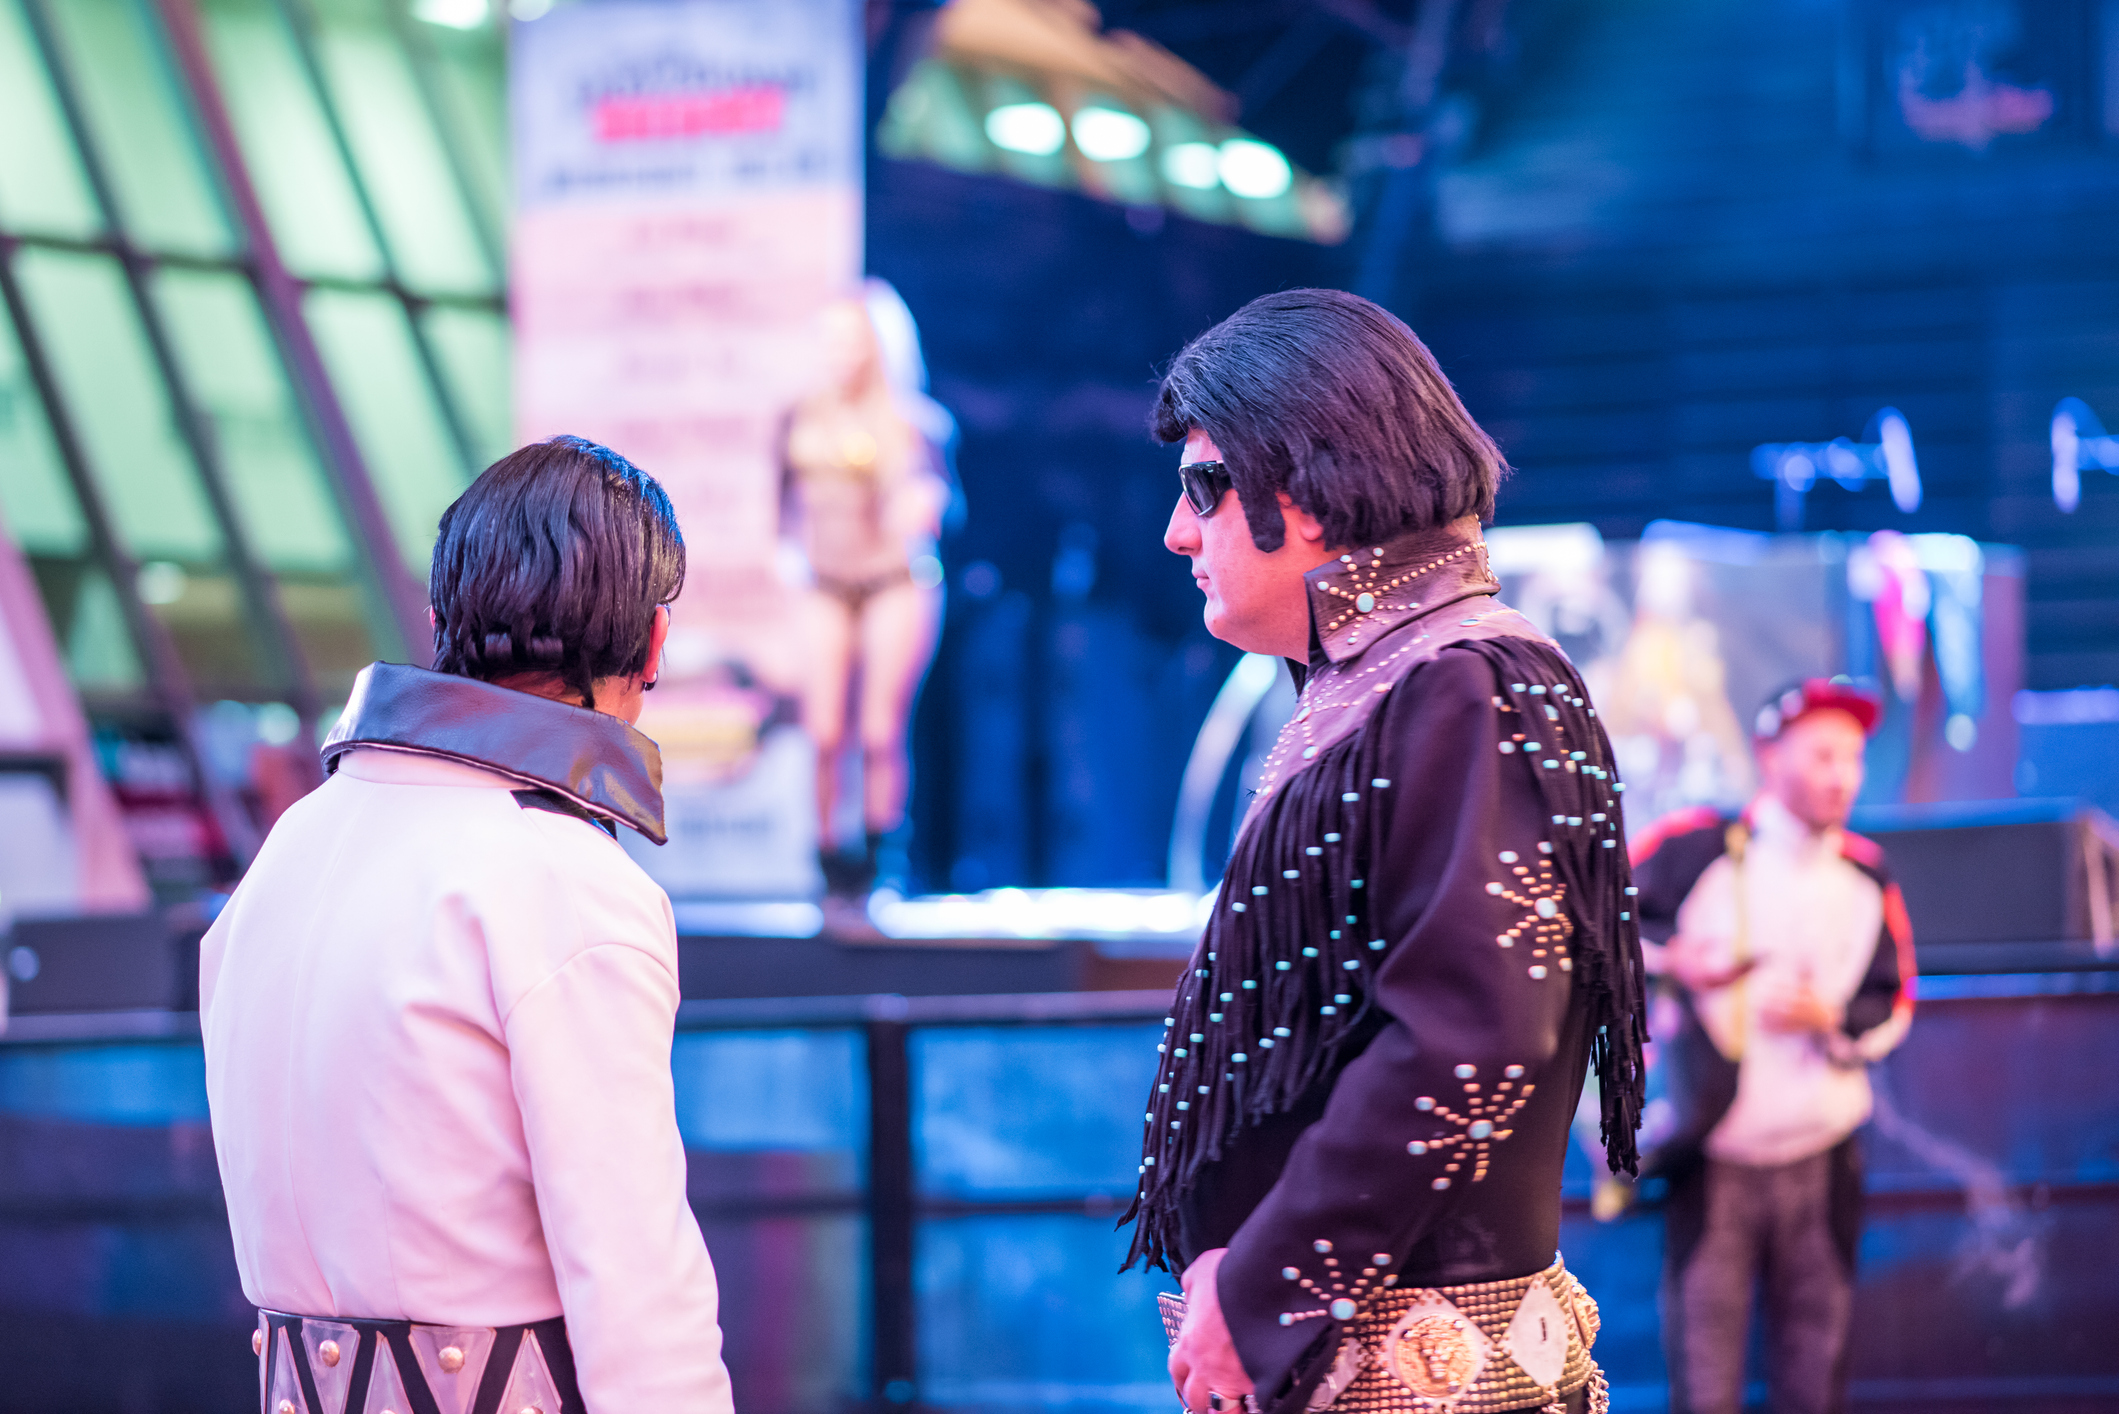 Two Elvis impersonators hanging out at the historic Fremont Street Experience, downtown Las Vegas.